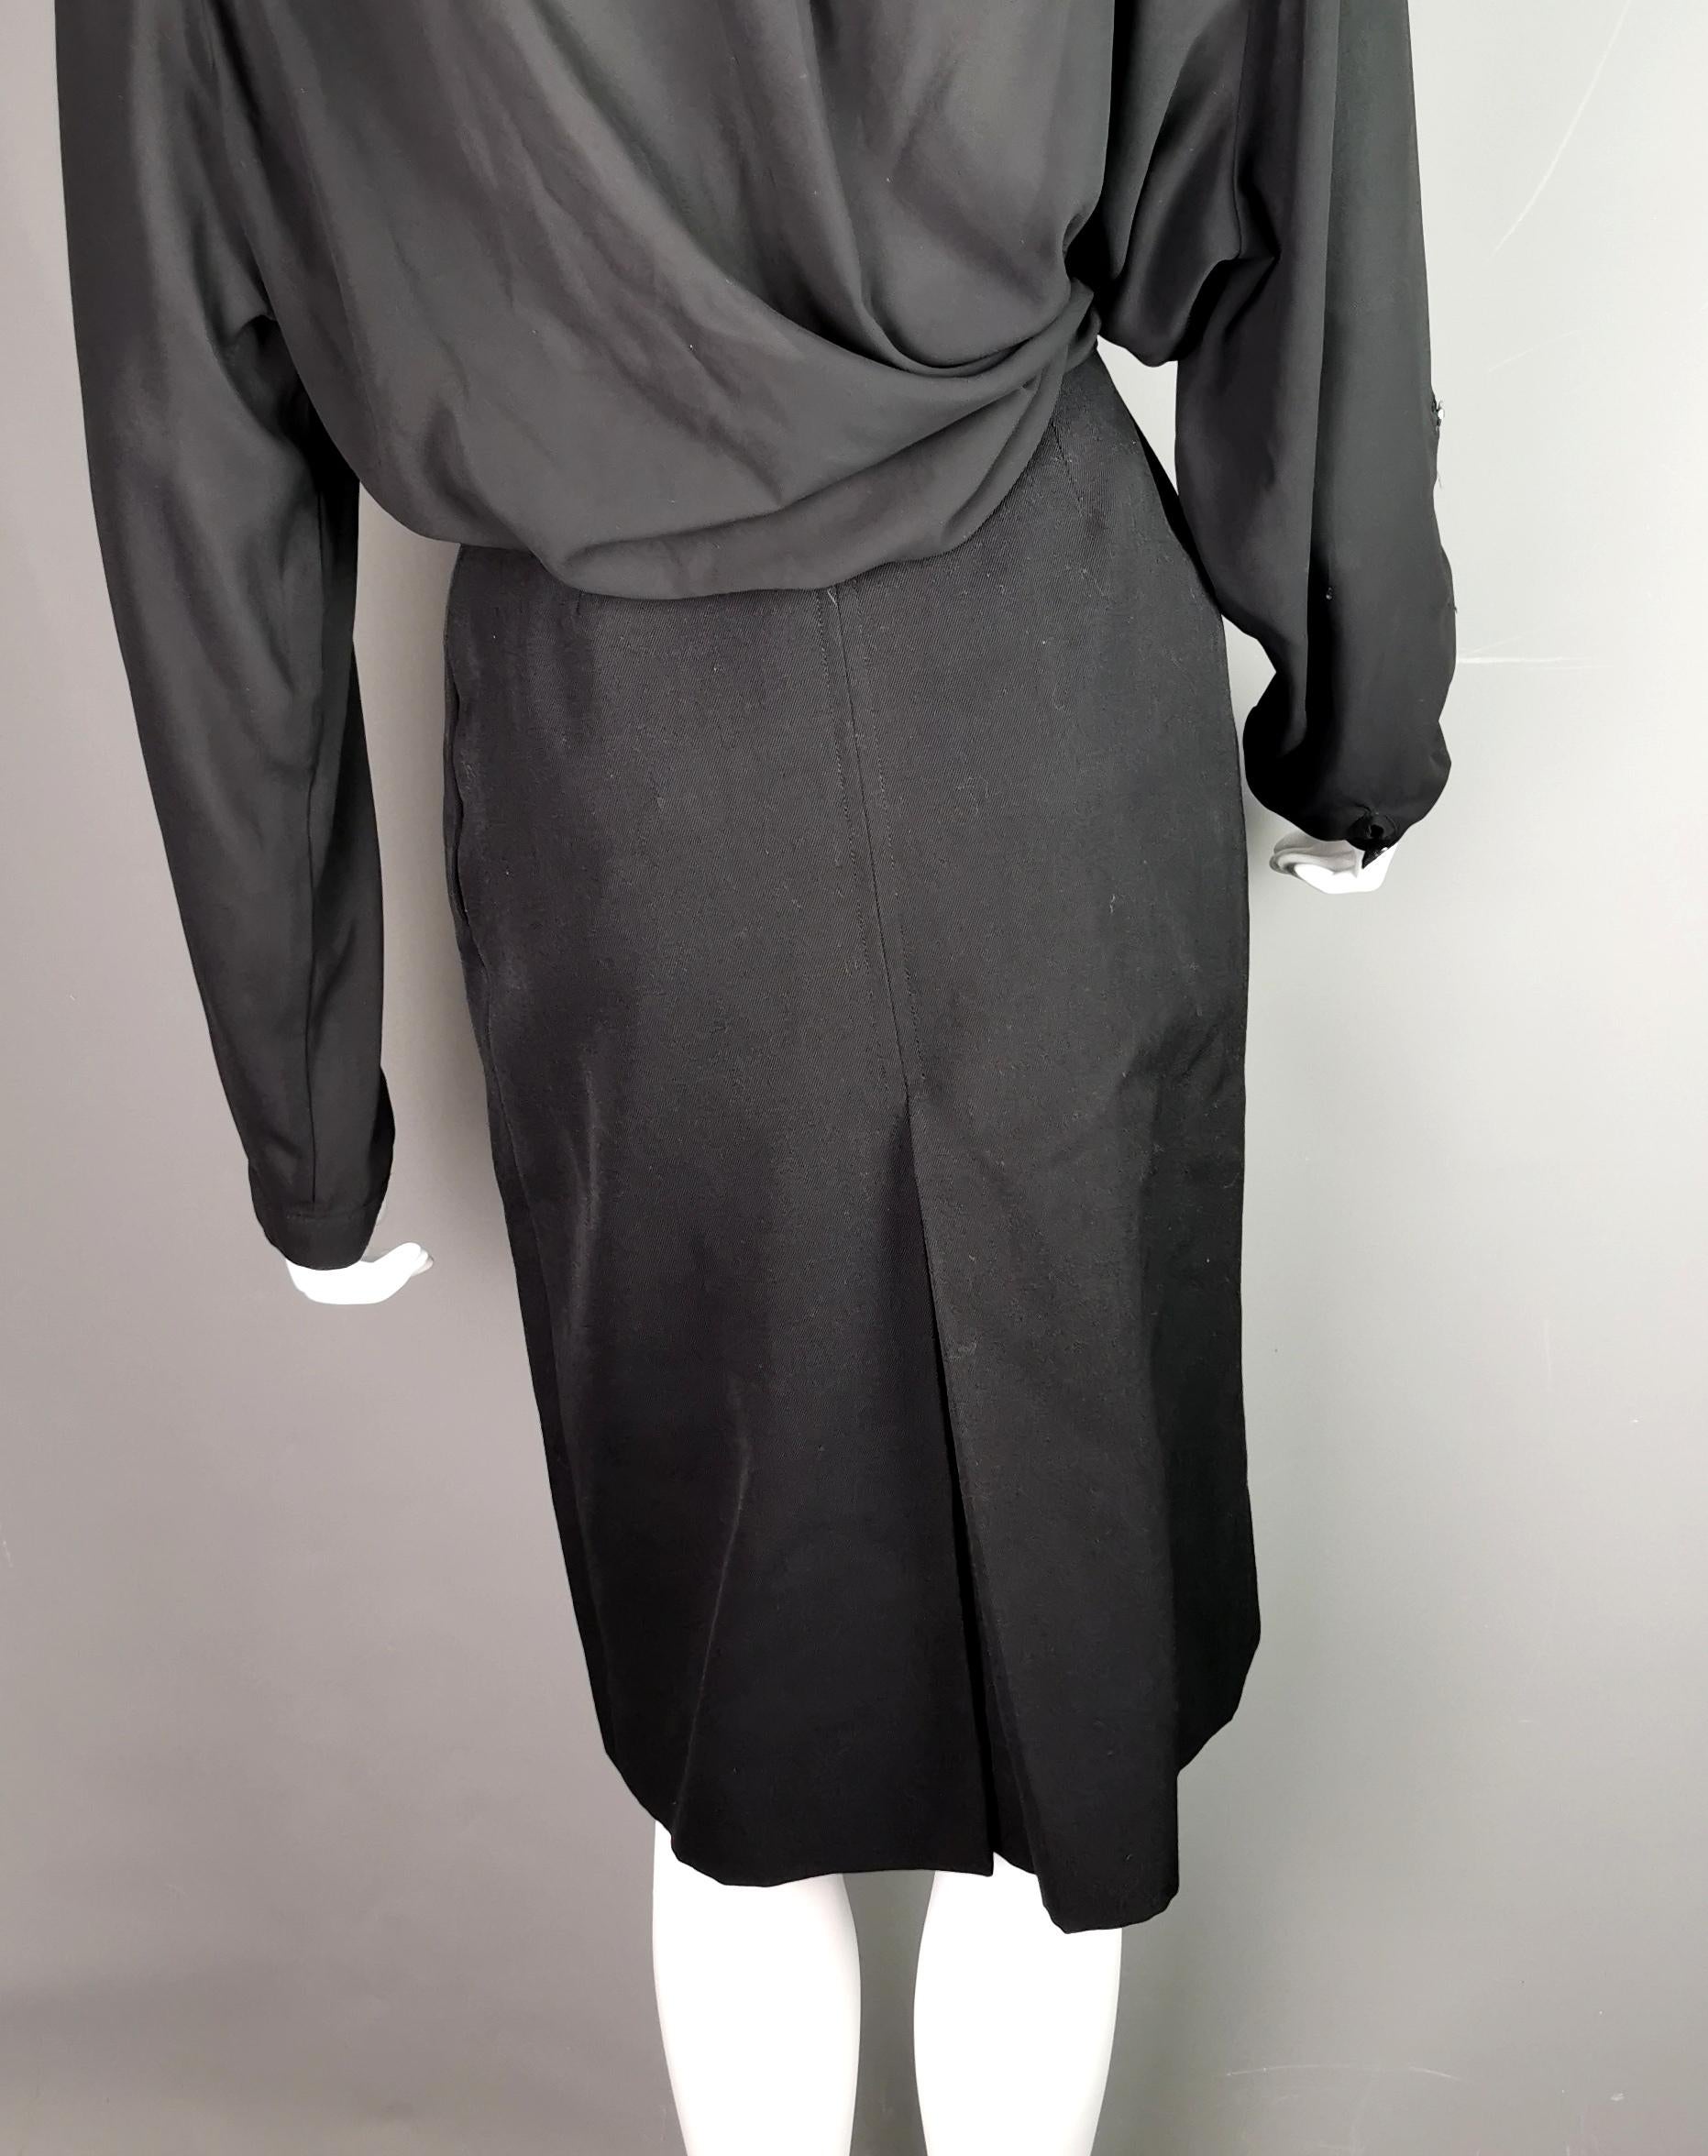 Vintage YSL Rive Gauche black wool pleat front skirt  For Sale 2